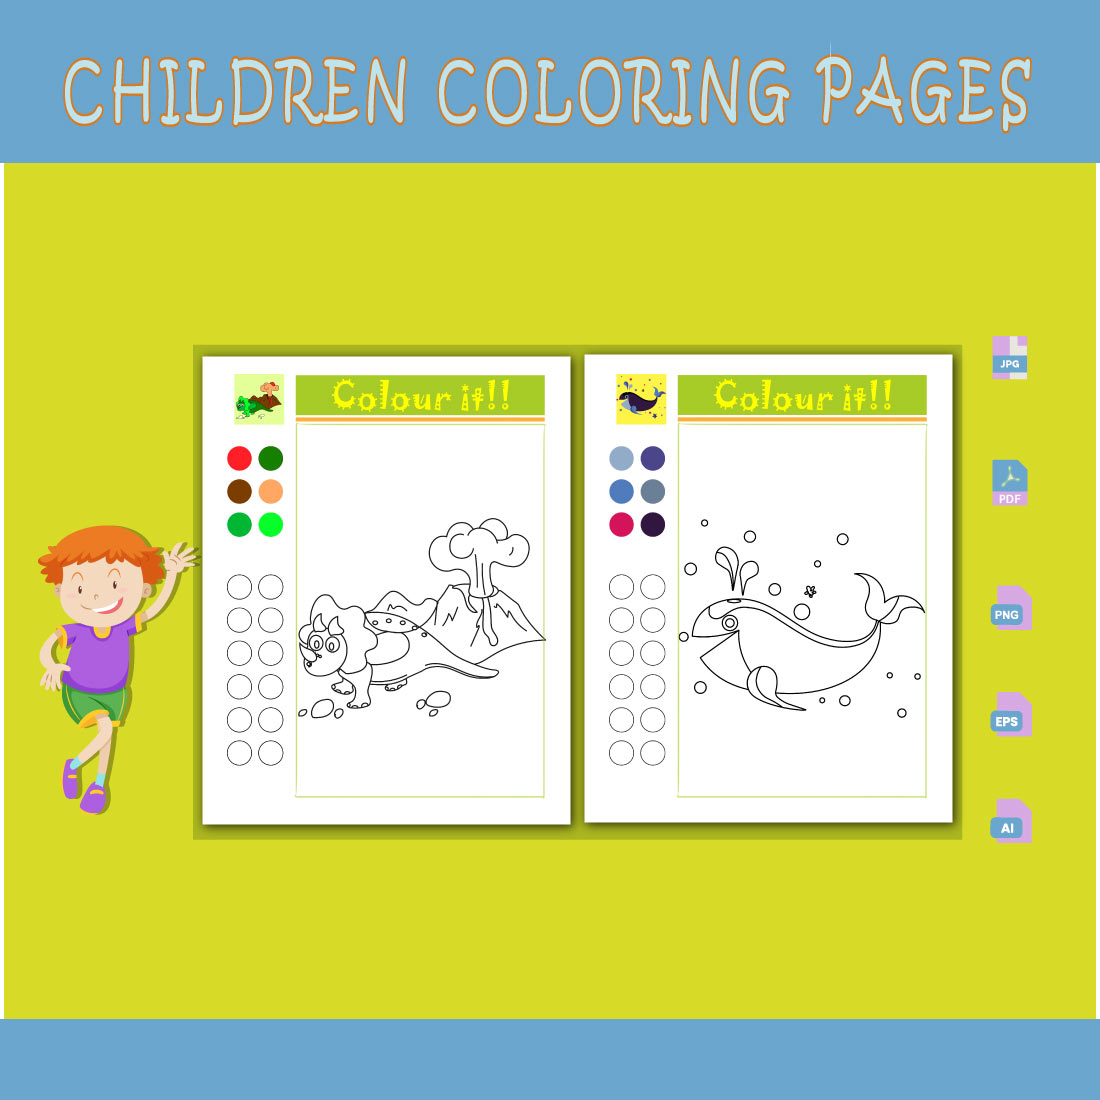 10 Children Coloring Pages cover image.